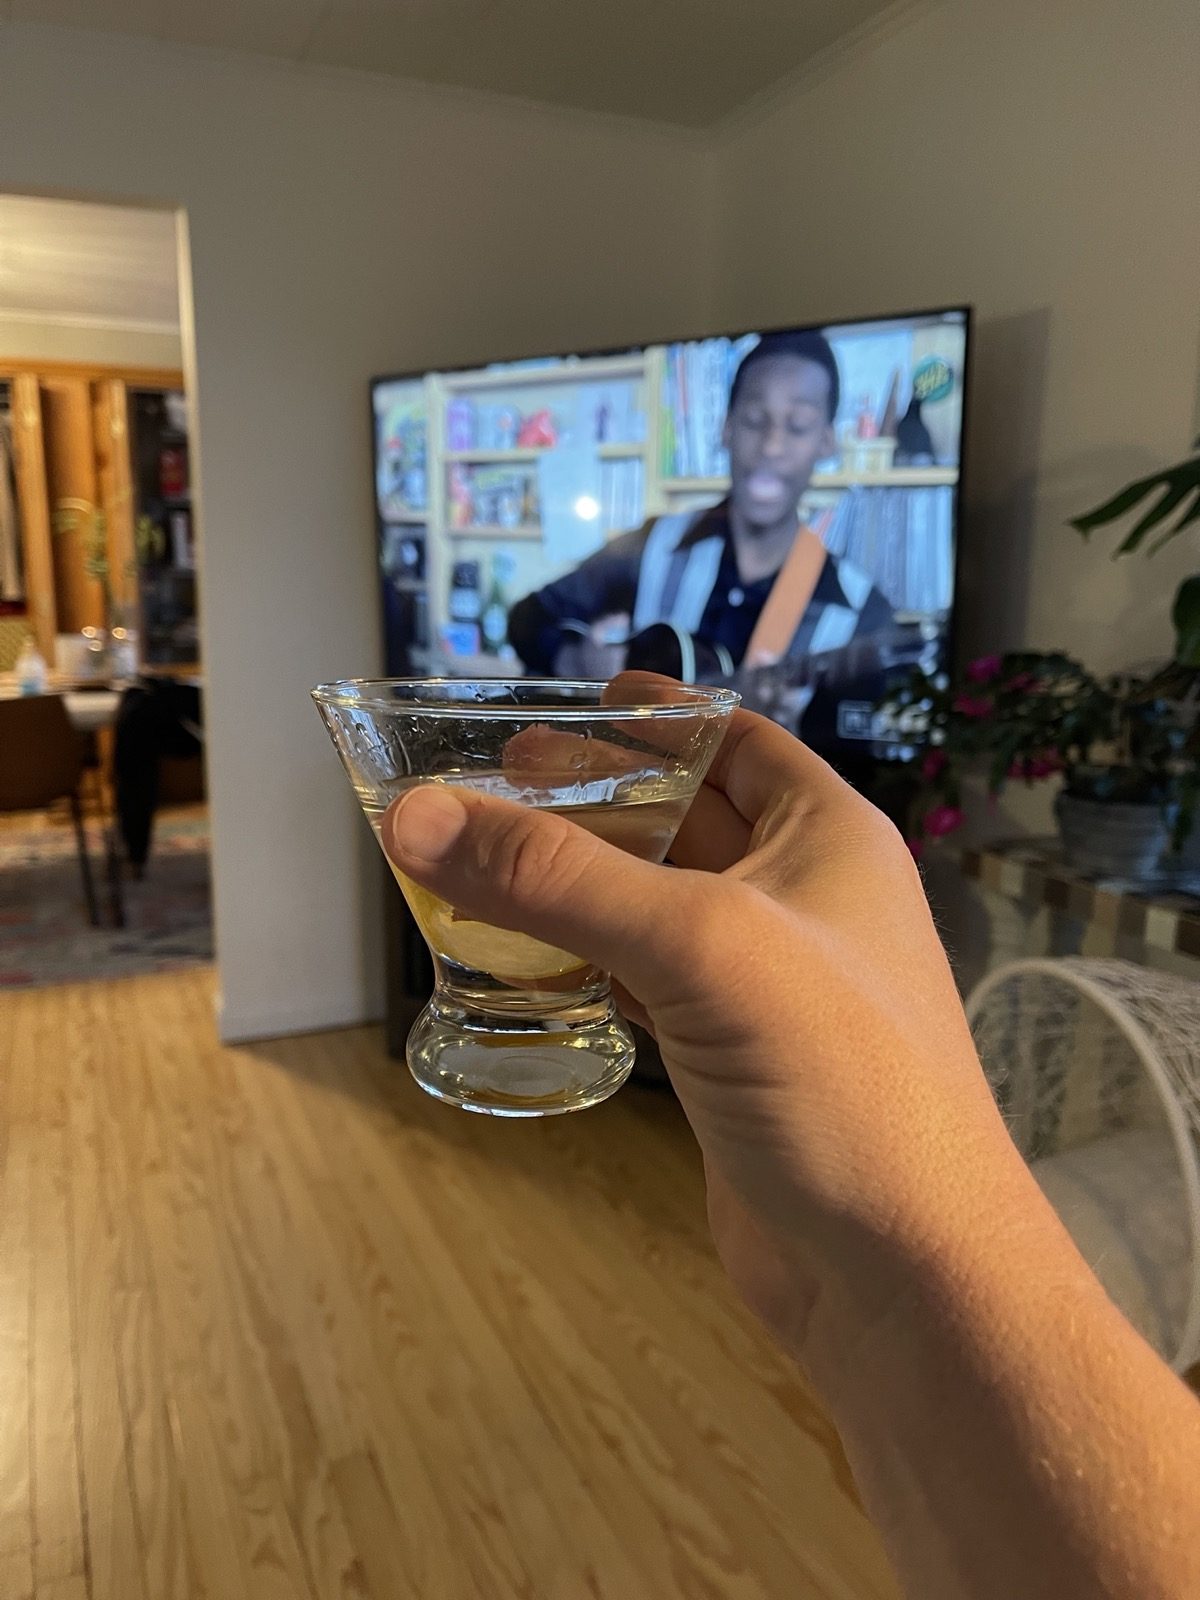 My right hand holding a martini with the TV blurry in the background showing Leon Bridge's tiny desk convert.